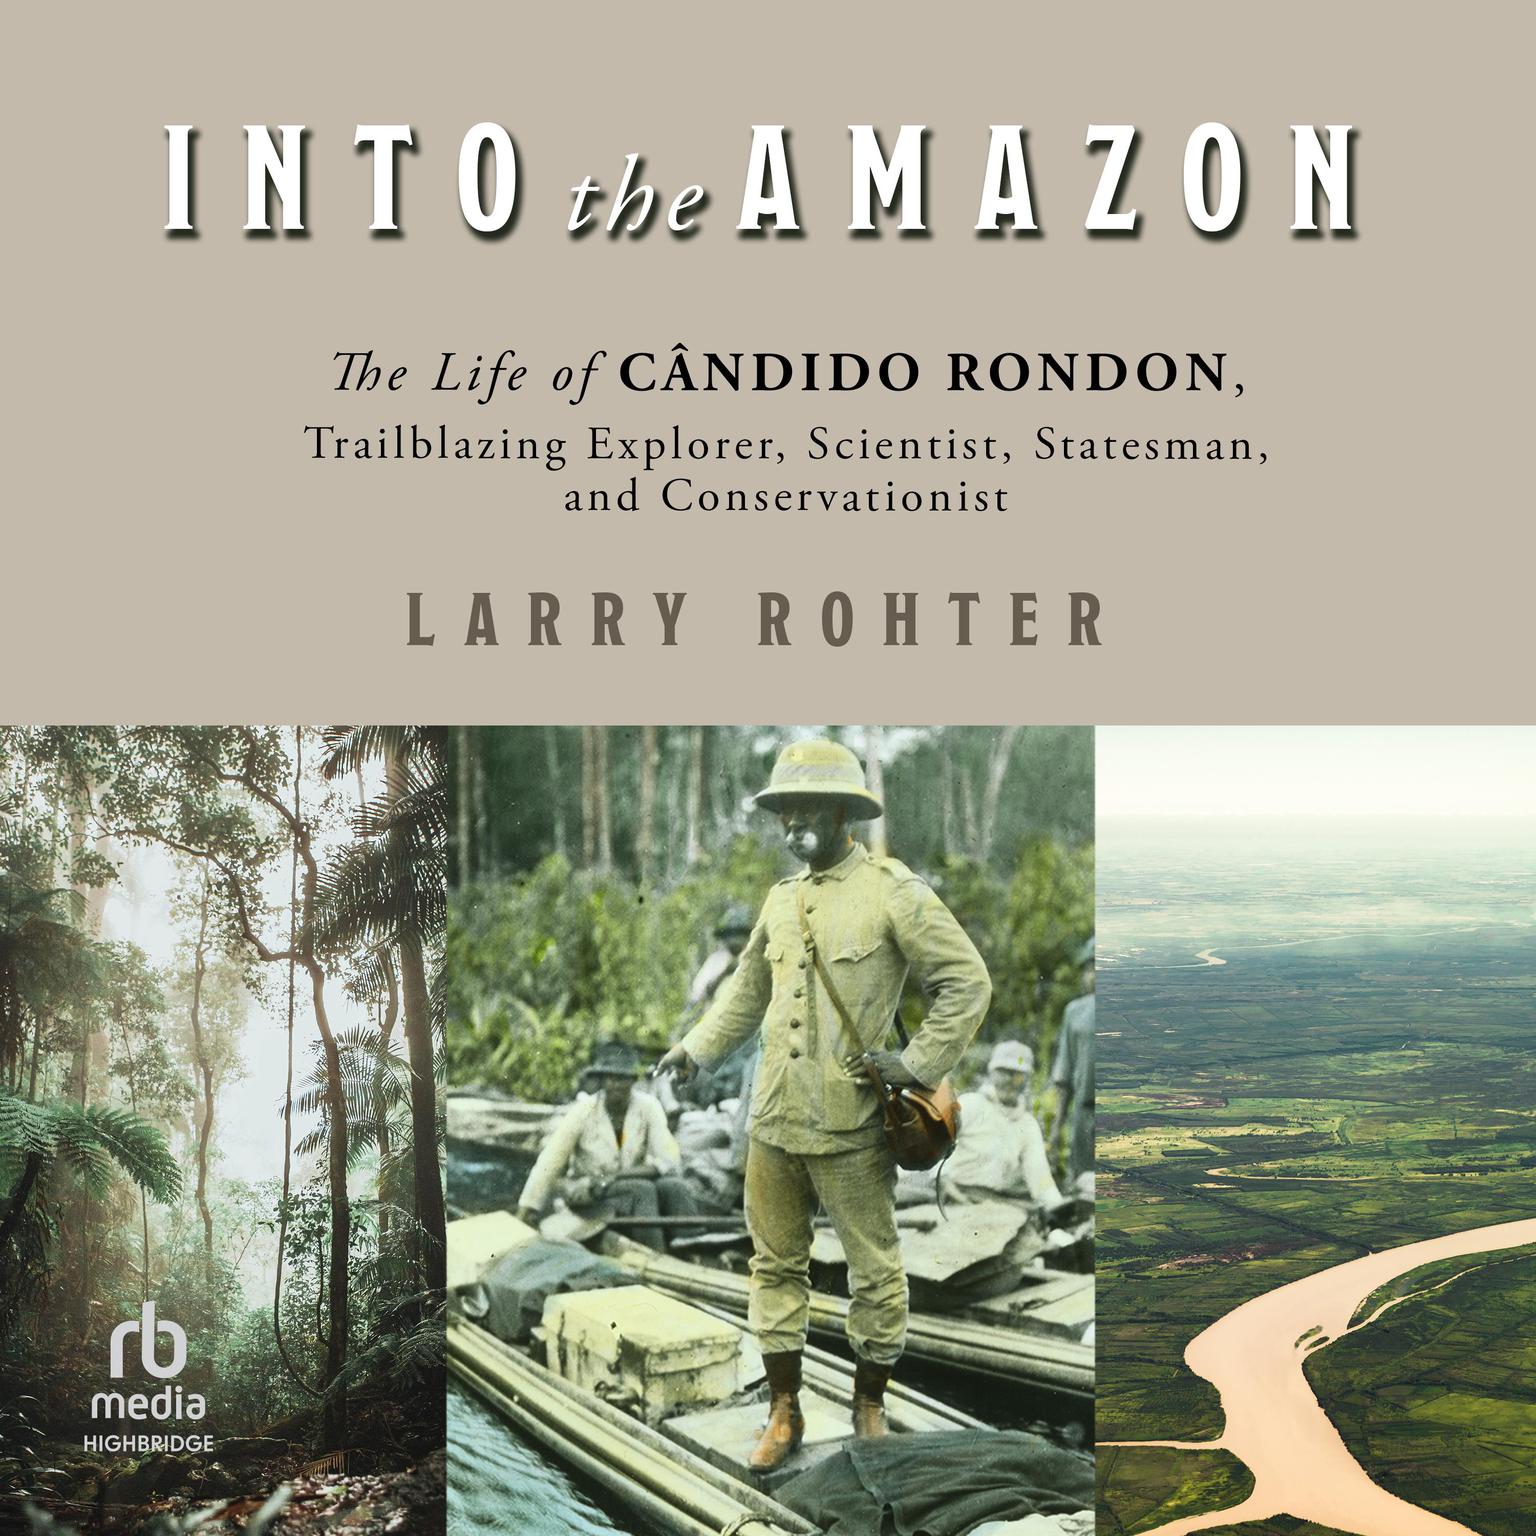 Into the Amazon: The Life of Cândido Rondon, Trailblazing Explorer, Scientist, Statesman, and Conservationist Audiobook, by Larry Rohter